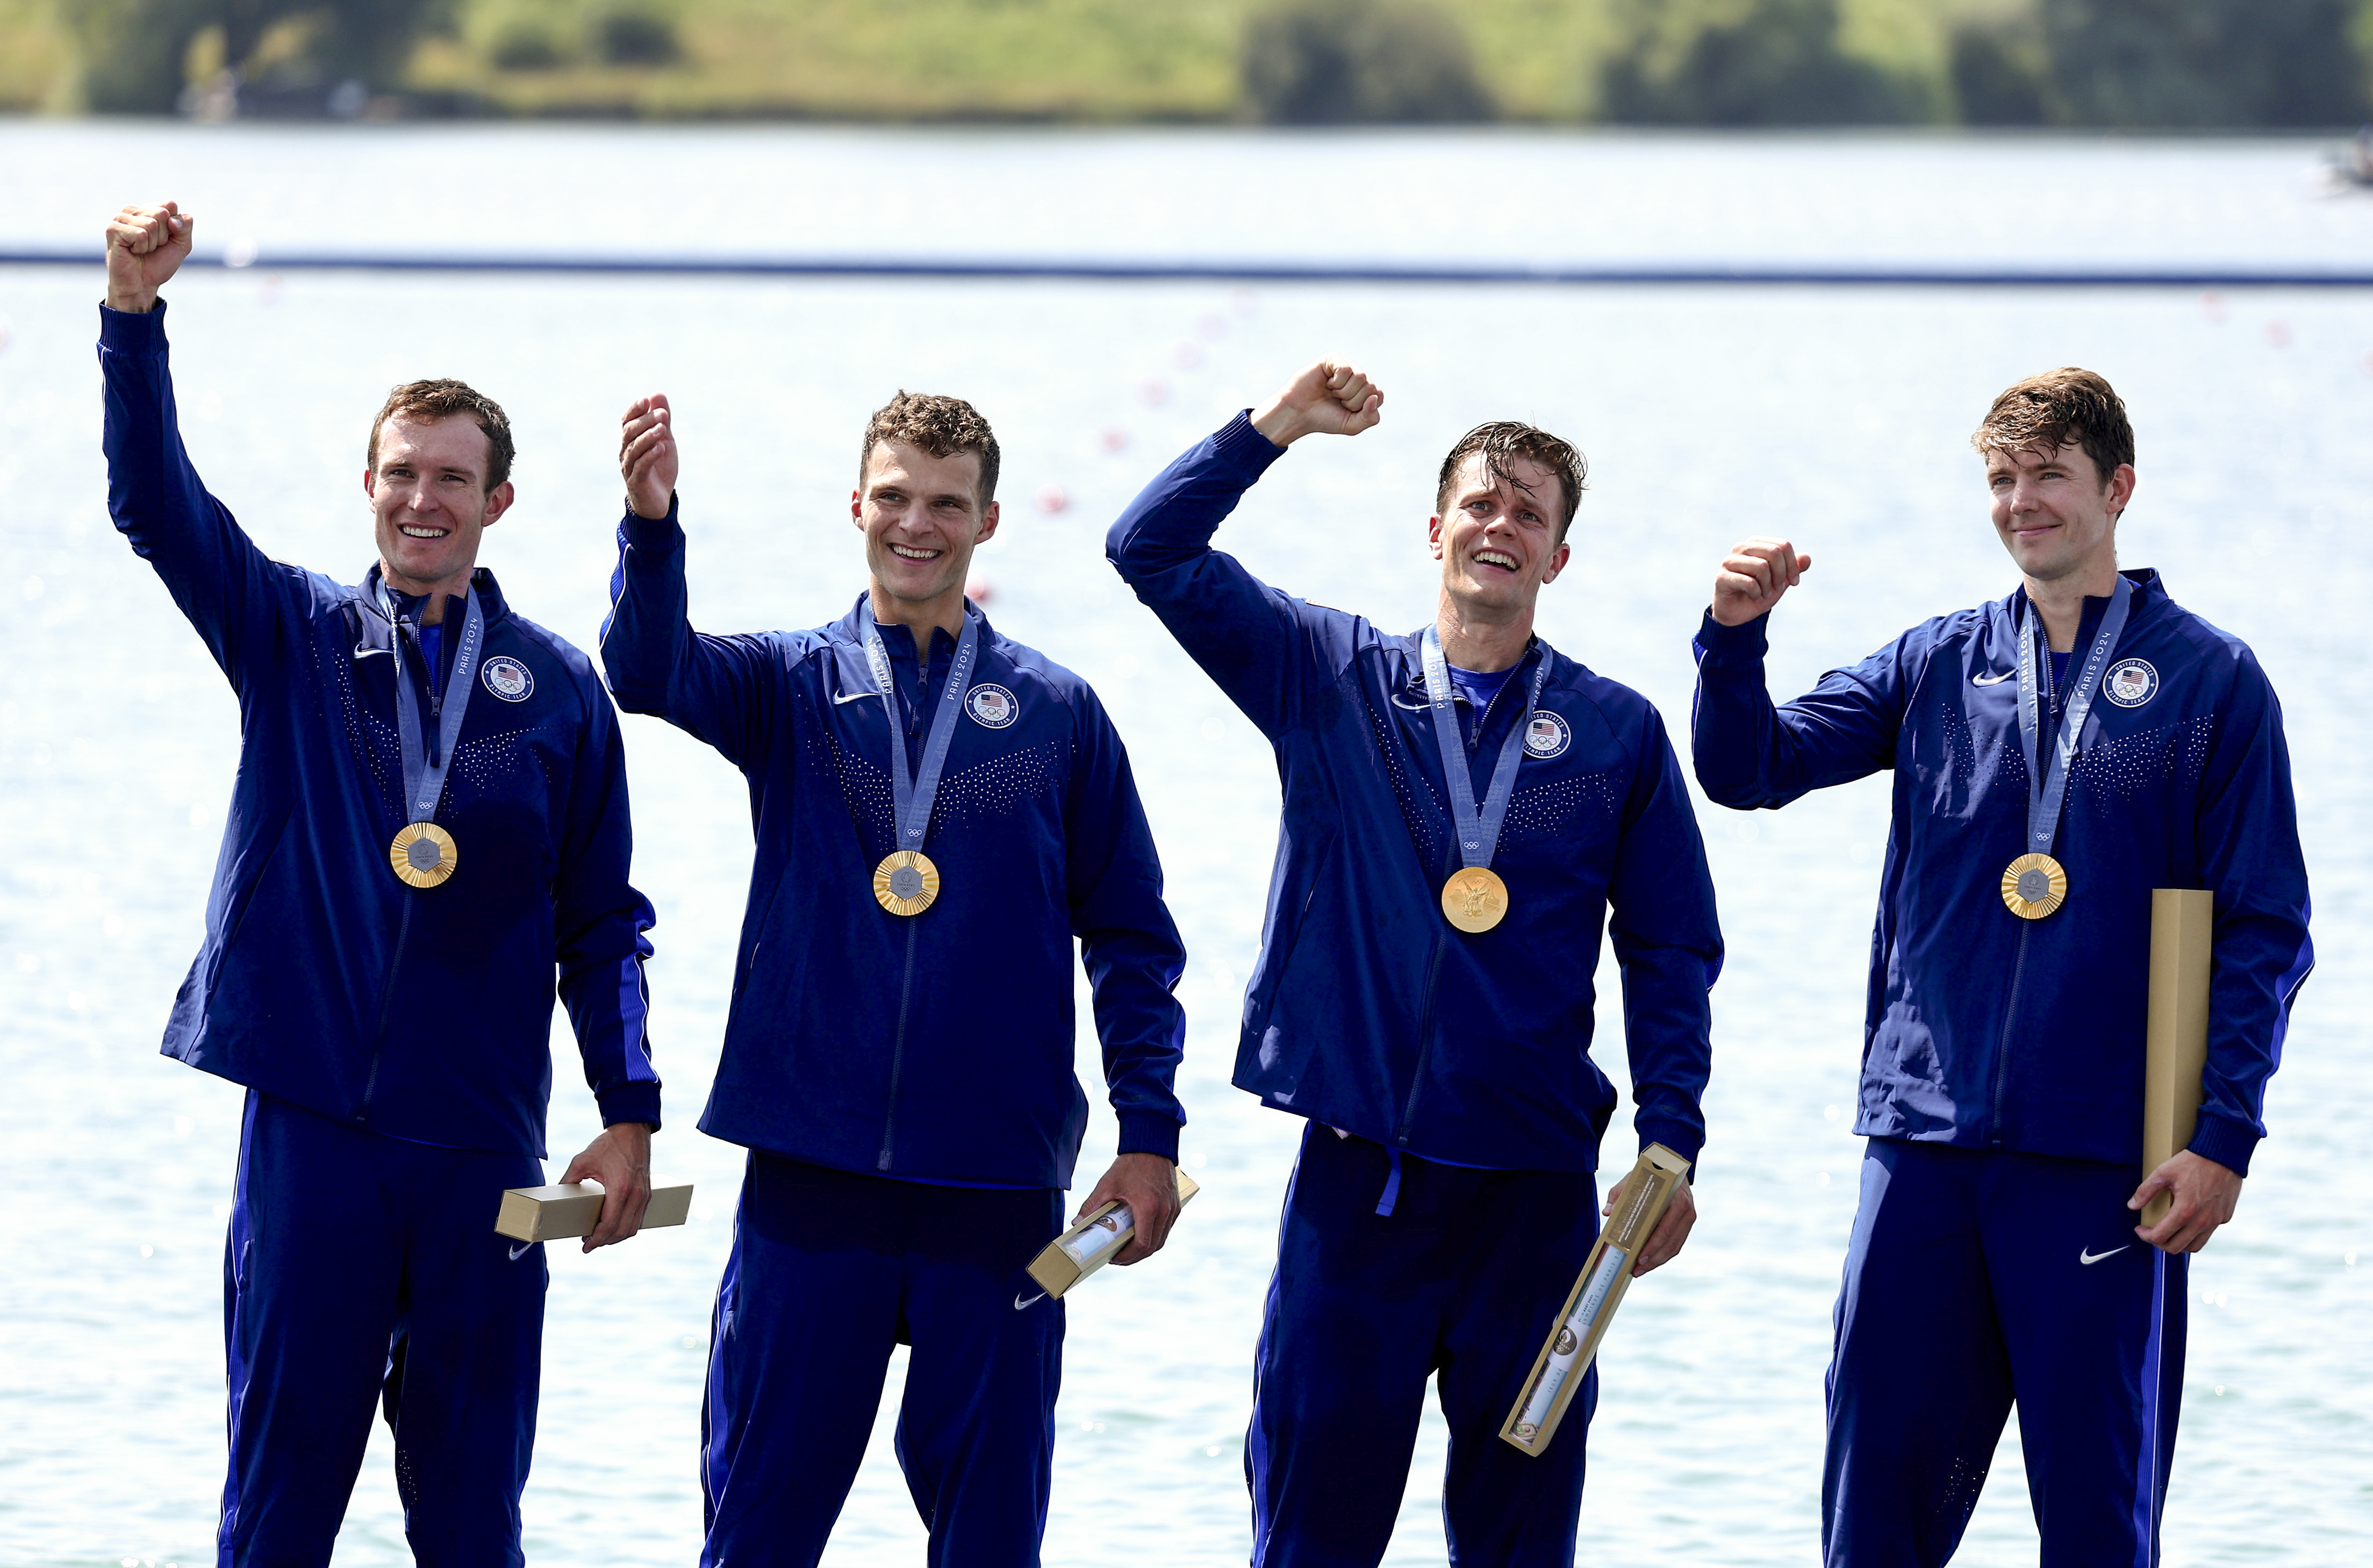 Paris Olympics Day 6: Team USA Wins Rowing Gold in Men’s Four